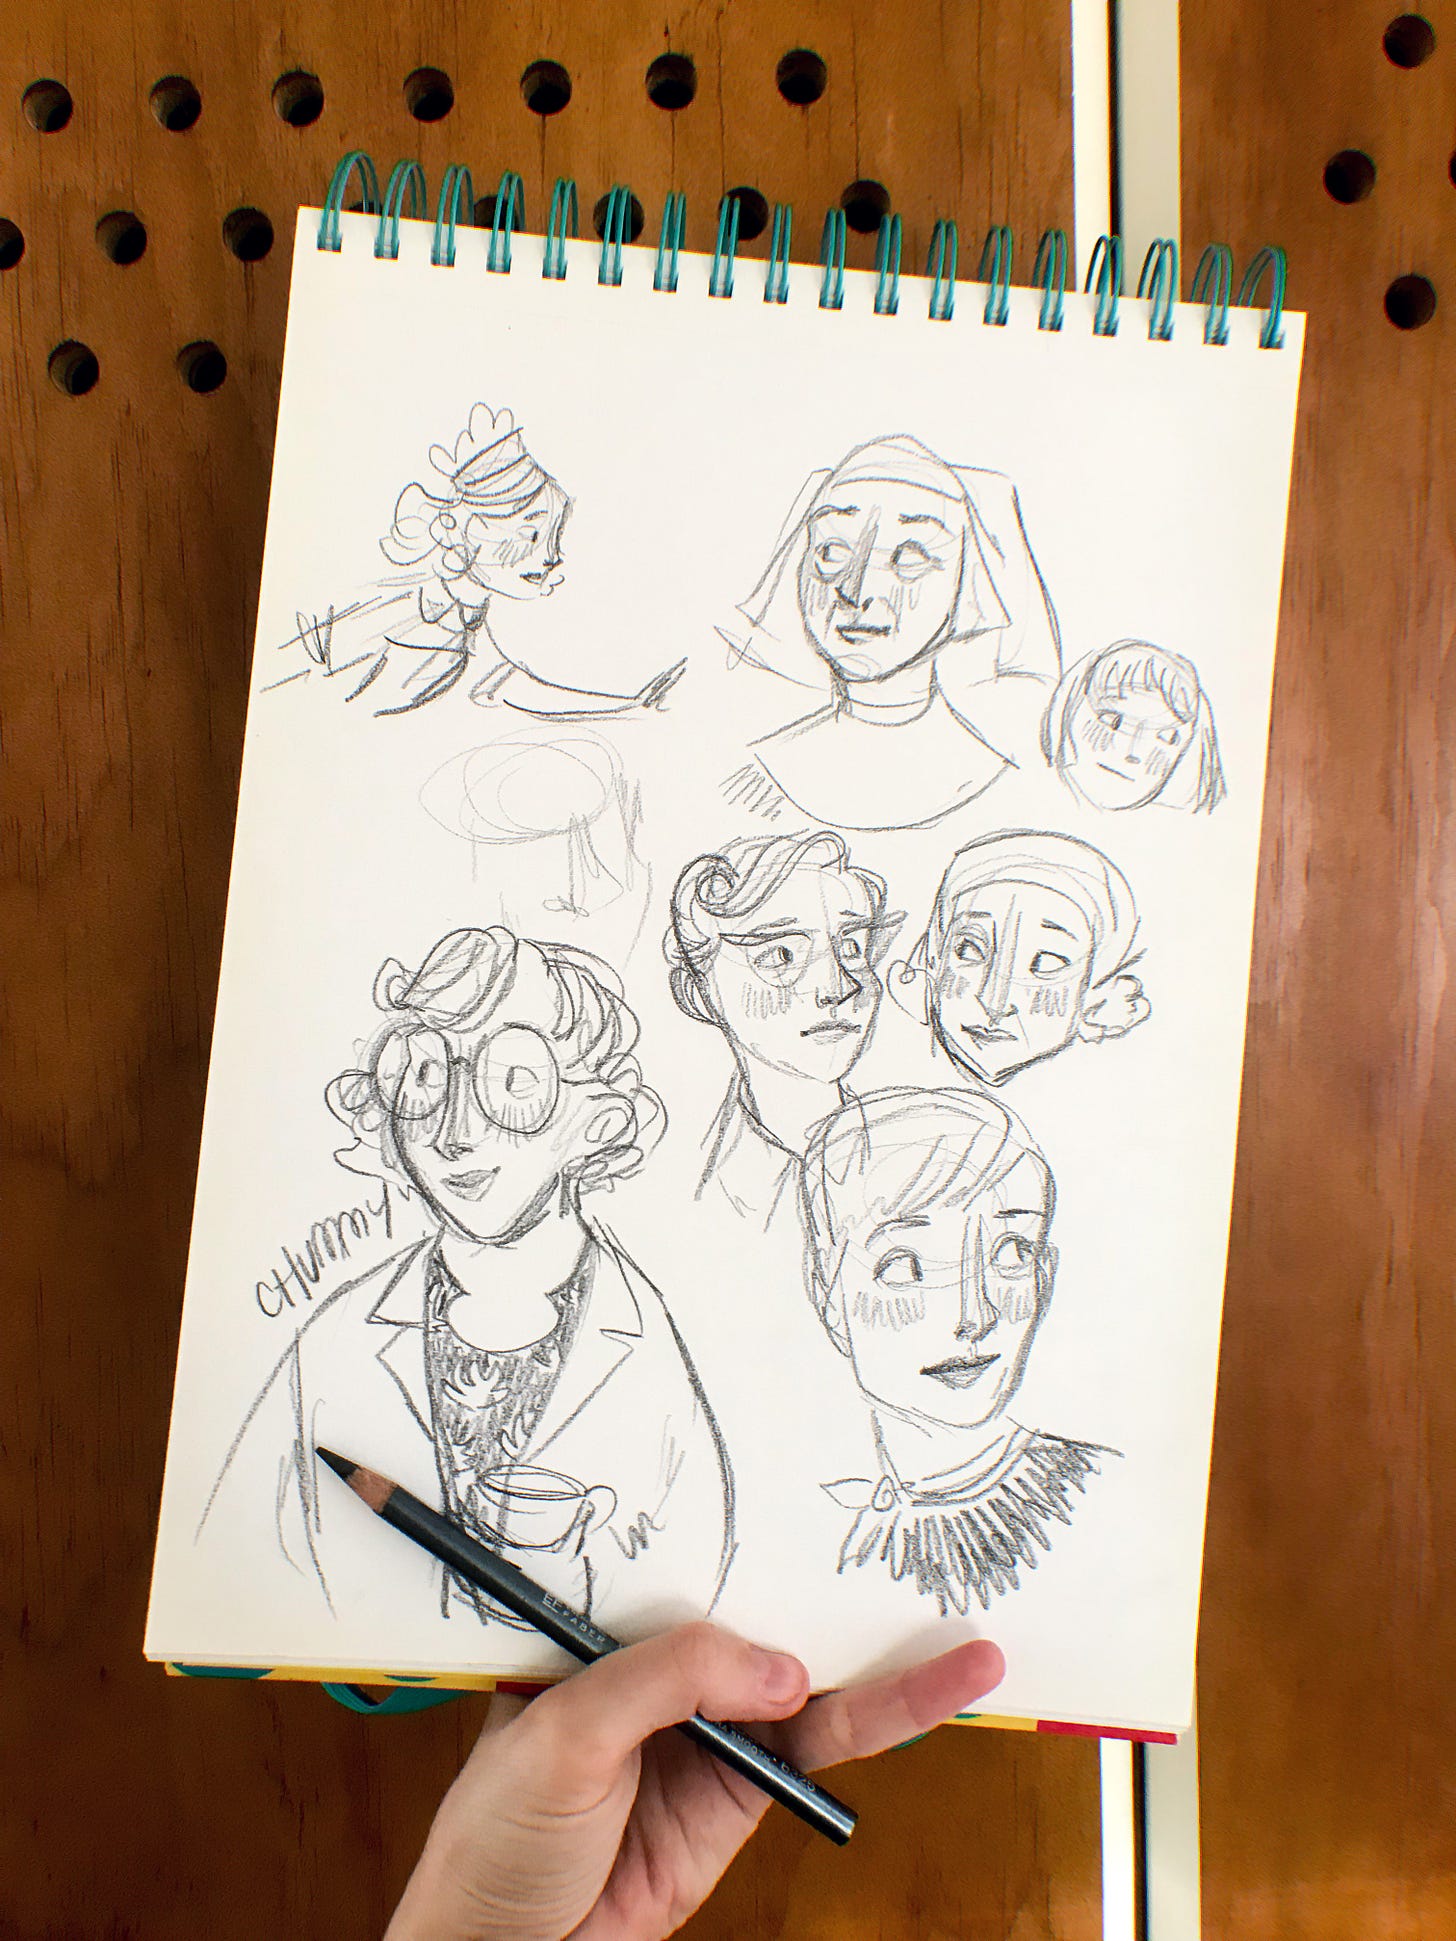 A photo of Gracie's hand holding up a sketchbook, with various sketches of Call the Midwife tv show characters on it